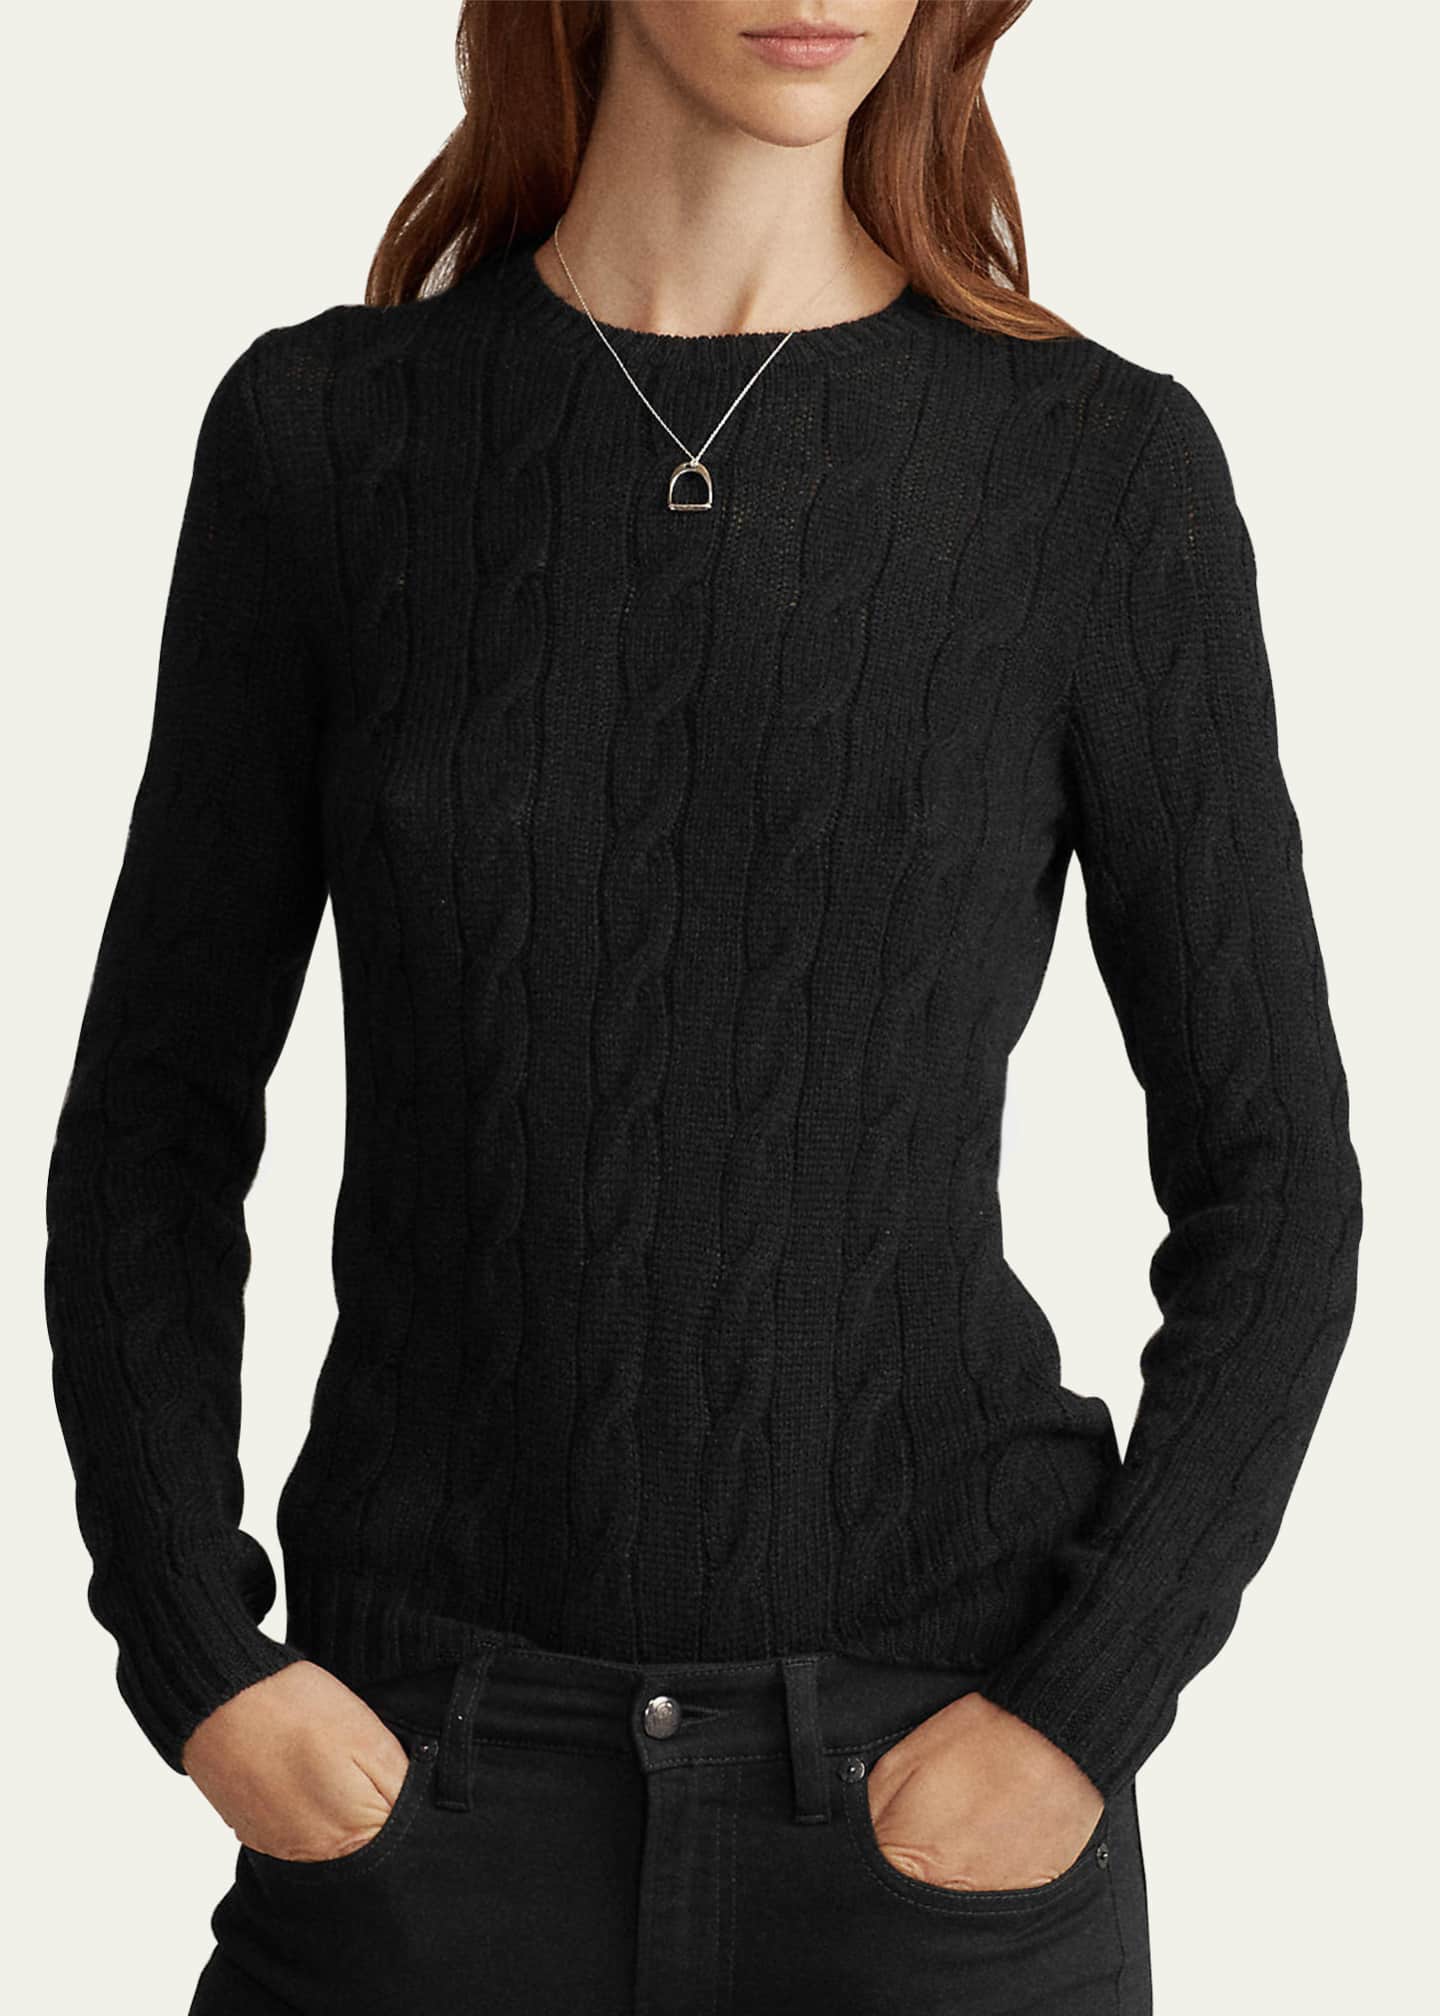 Ralph Lauren Collection Cashmere Cable-Knit Sweater